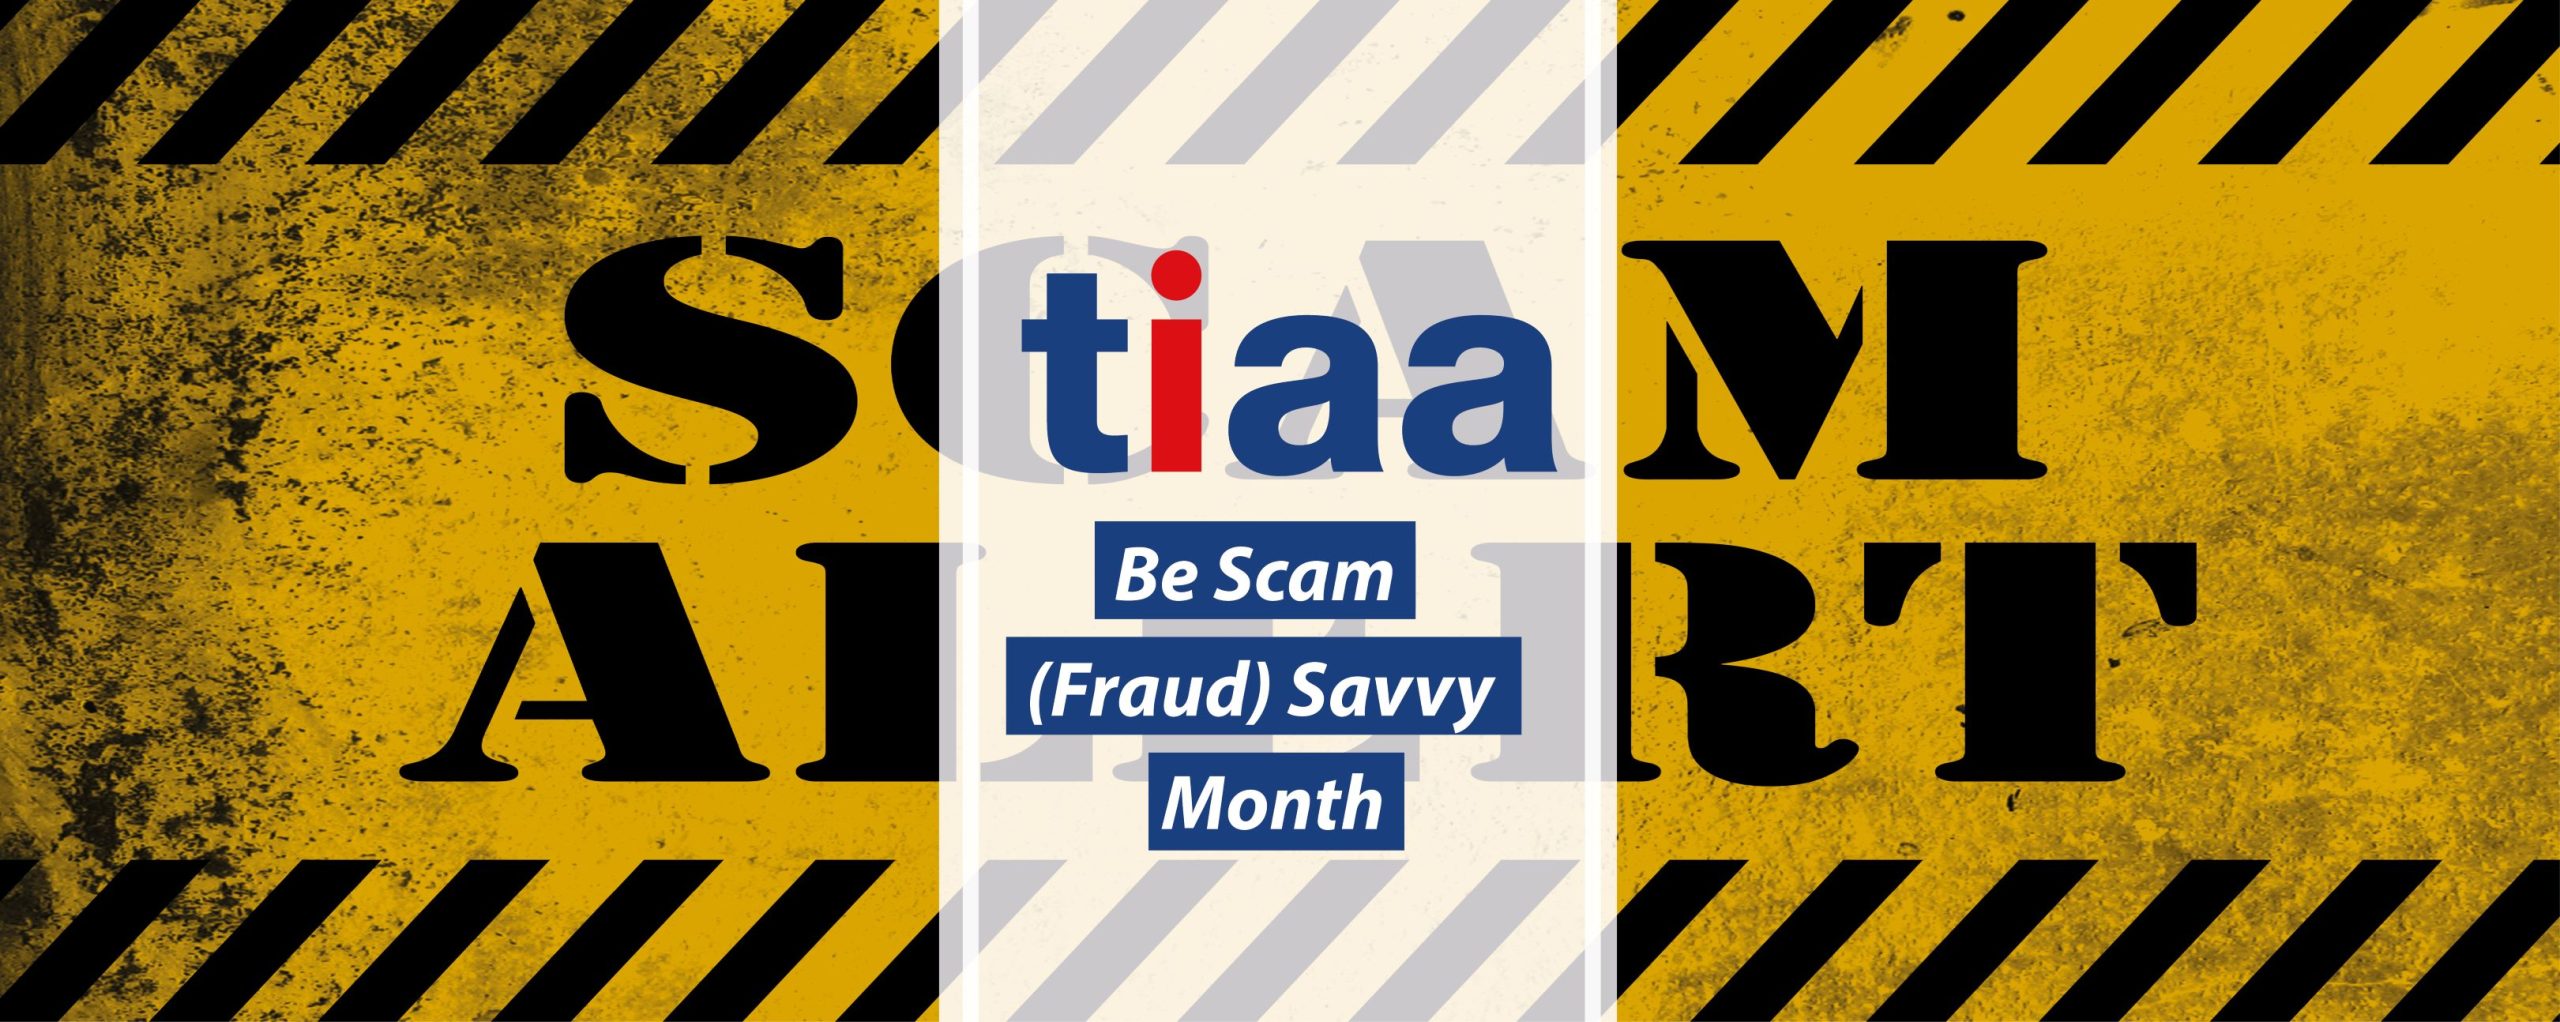 TIAA’s Be Scam (Fraud) Savvy Month